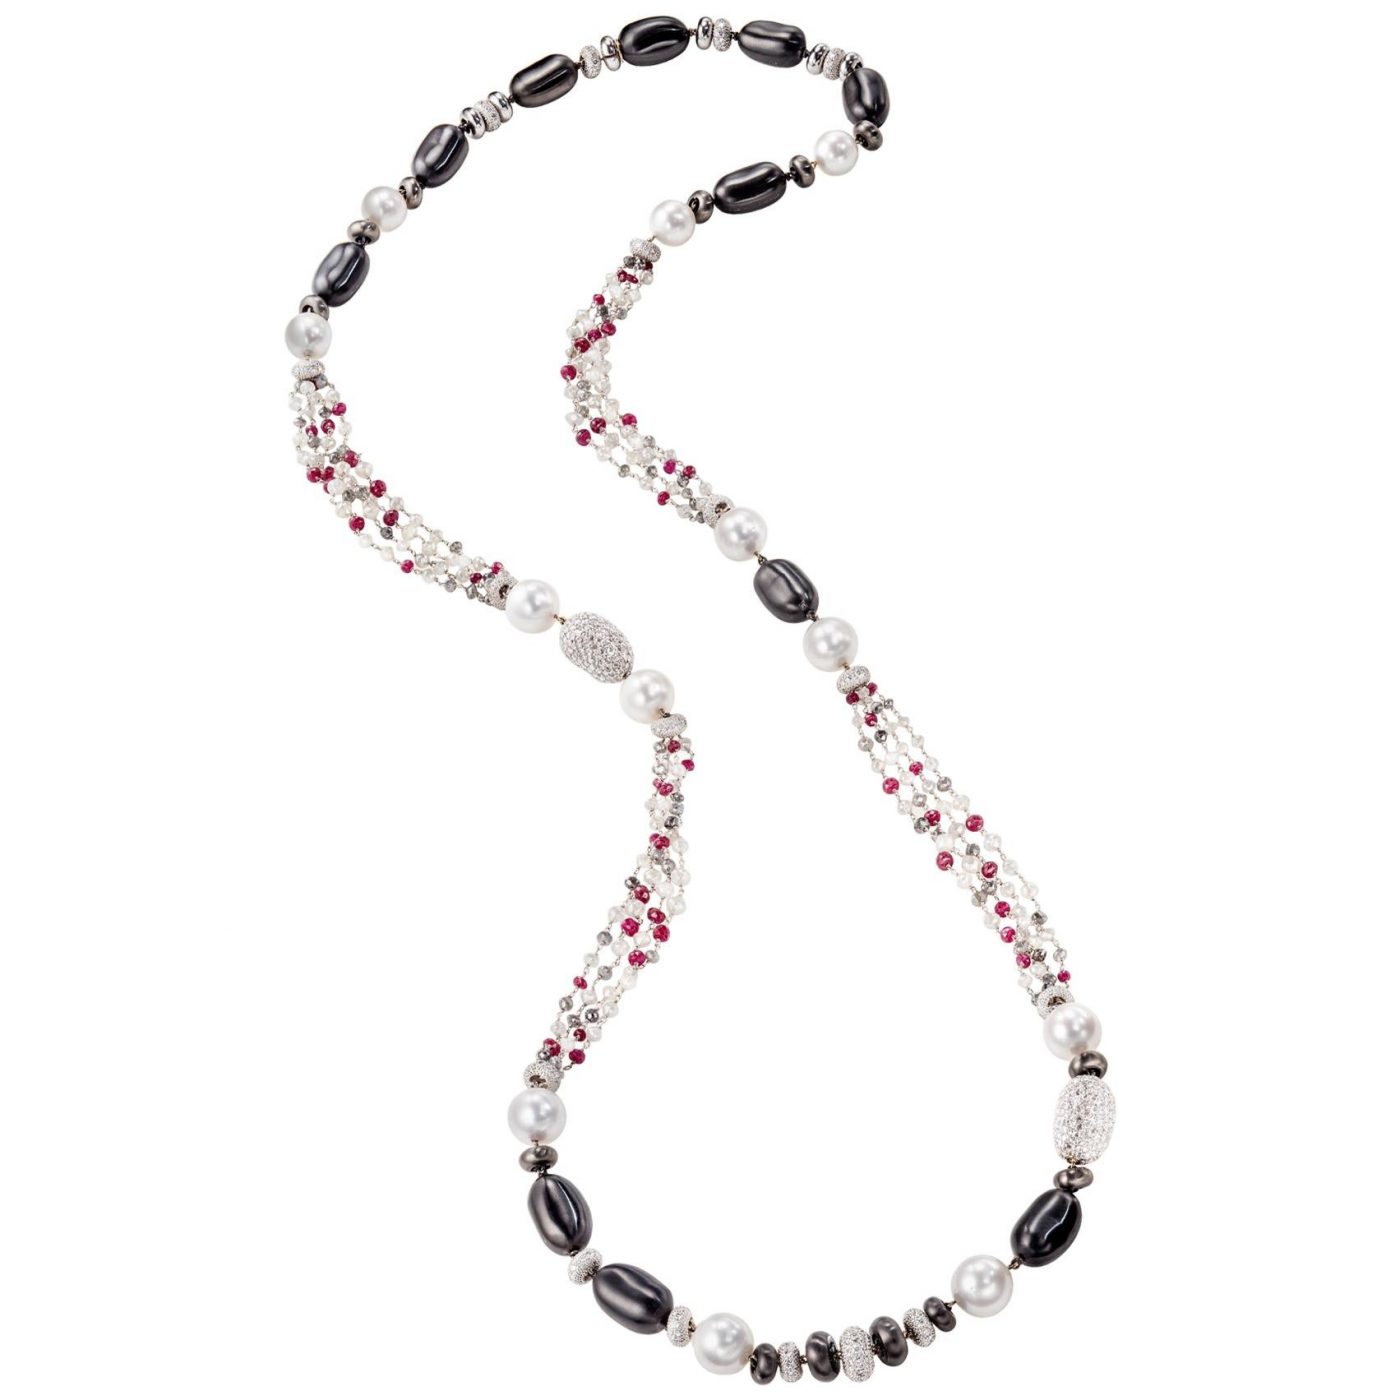 Sabbadini Long Necklace with Pearls, Diamonds and Rubies